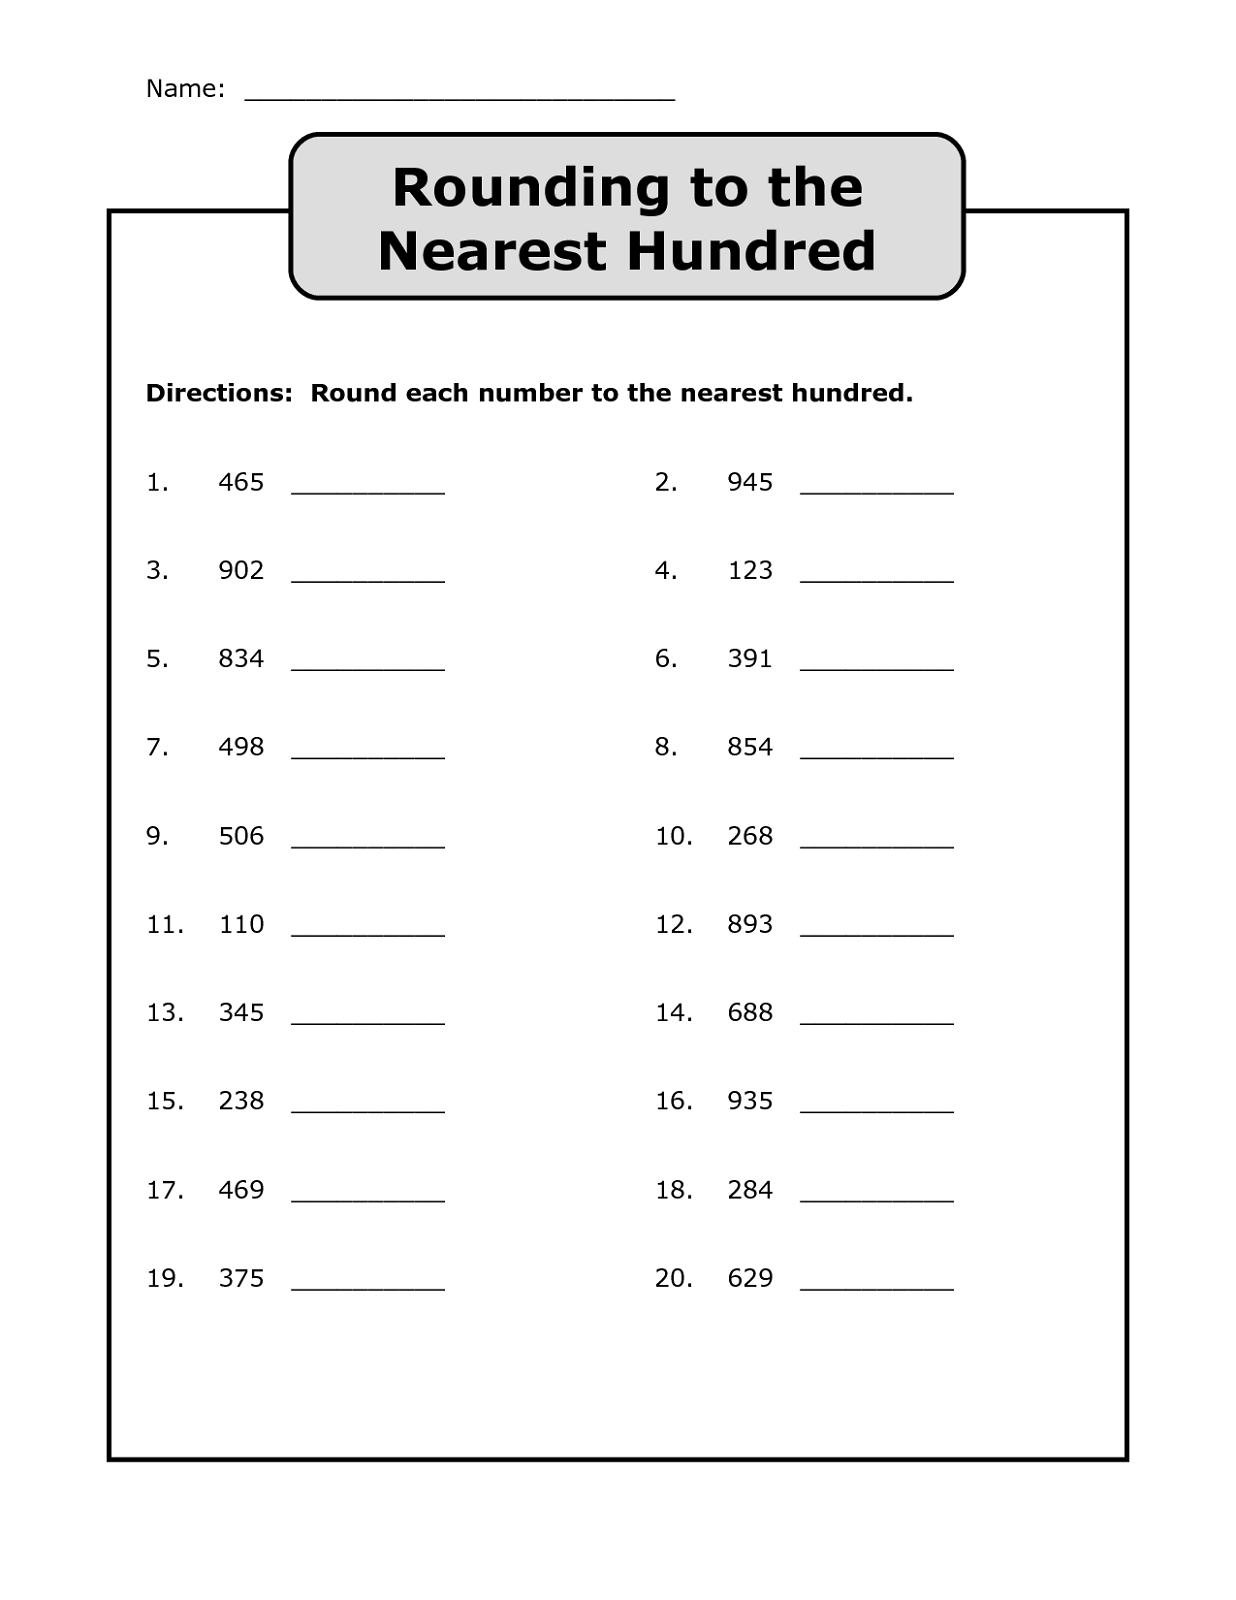 rounding-to-the-tenths-place-worksheet